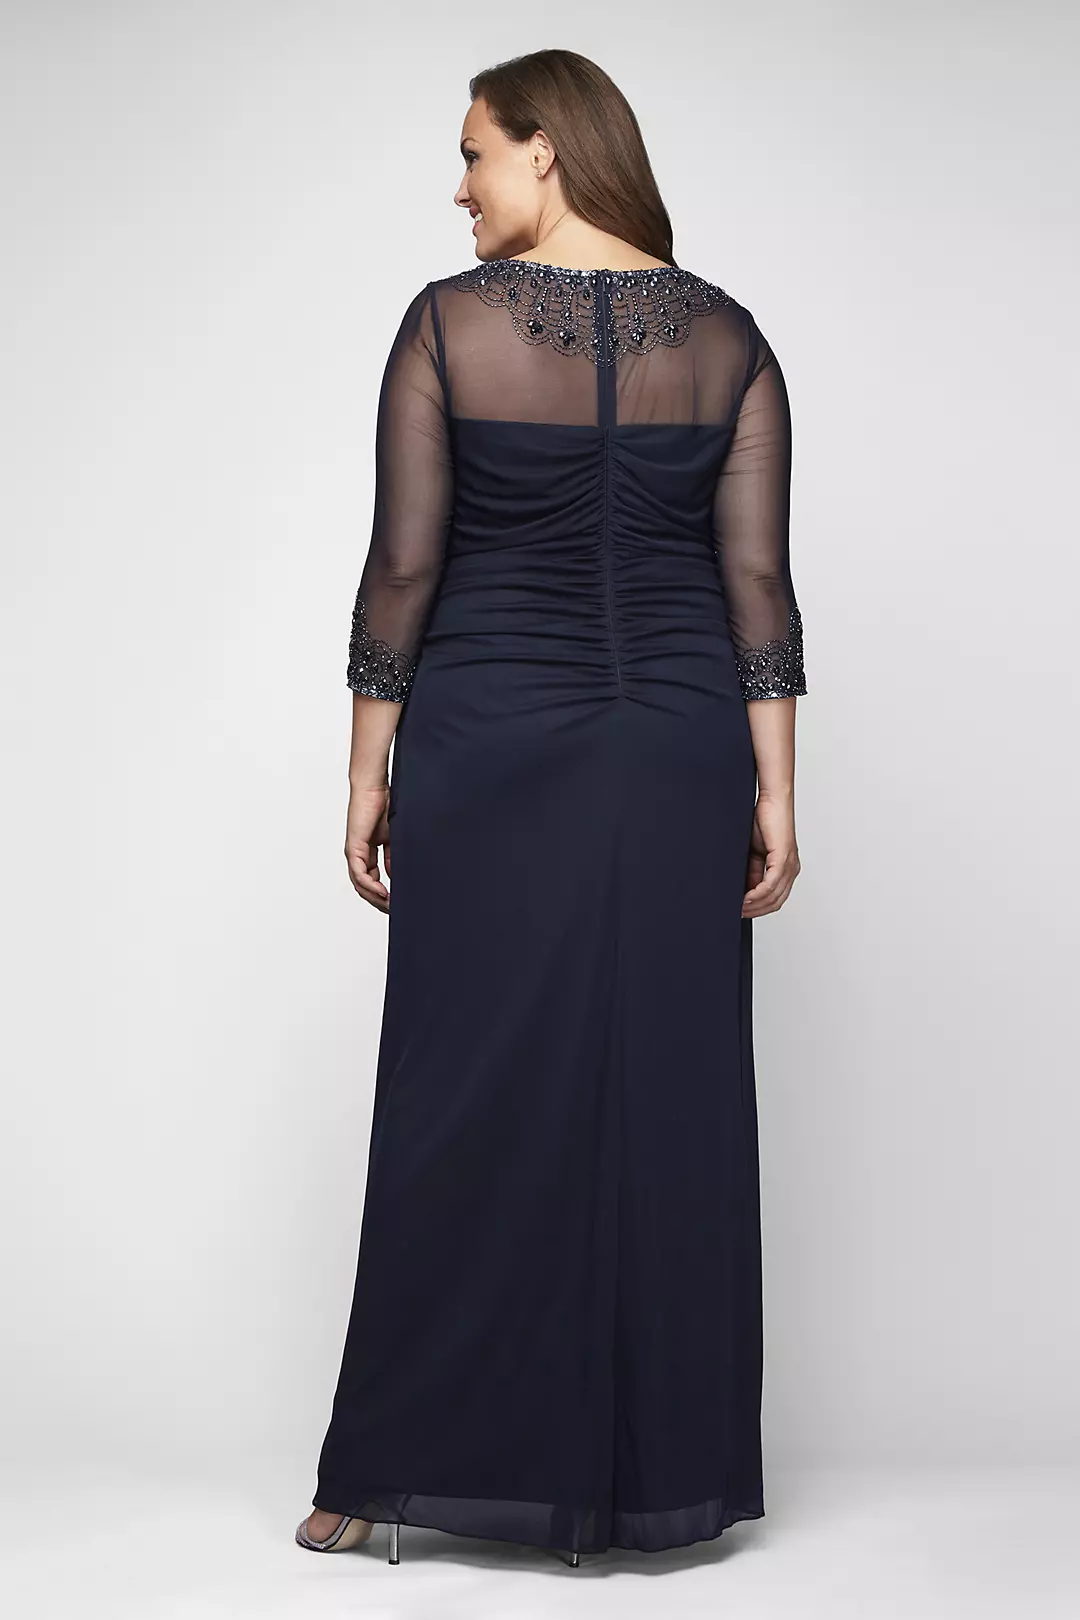 Beaded Illusion 3/4 Sleeve Mesh Plus Size Gown Image 2